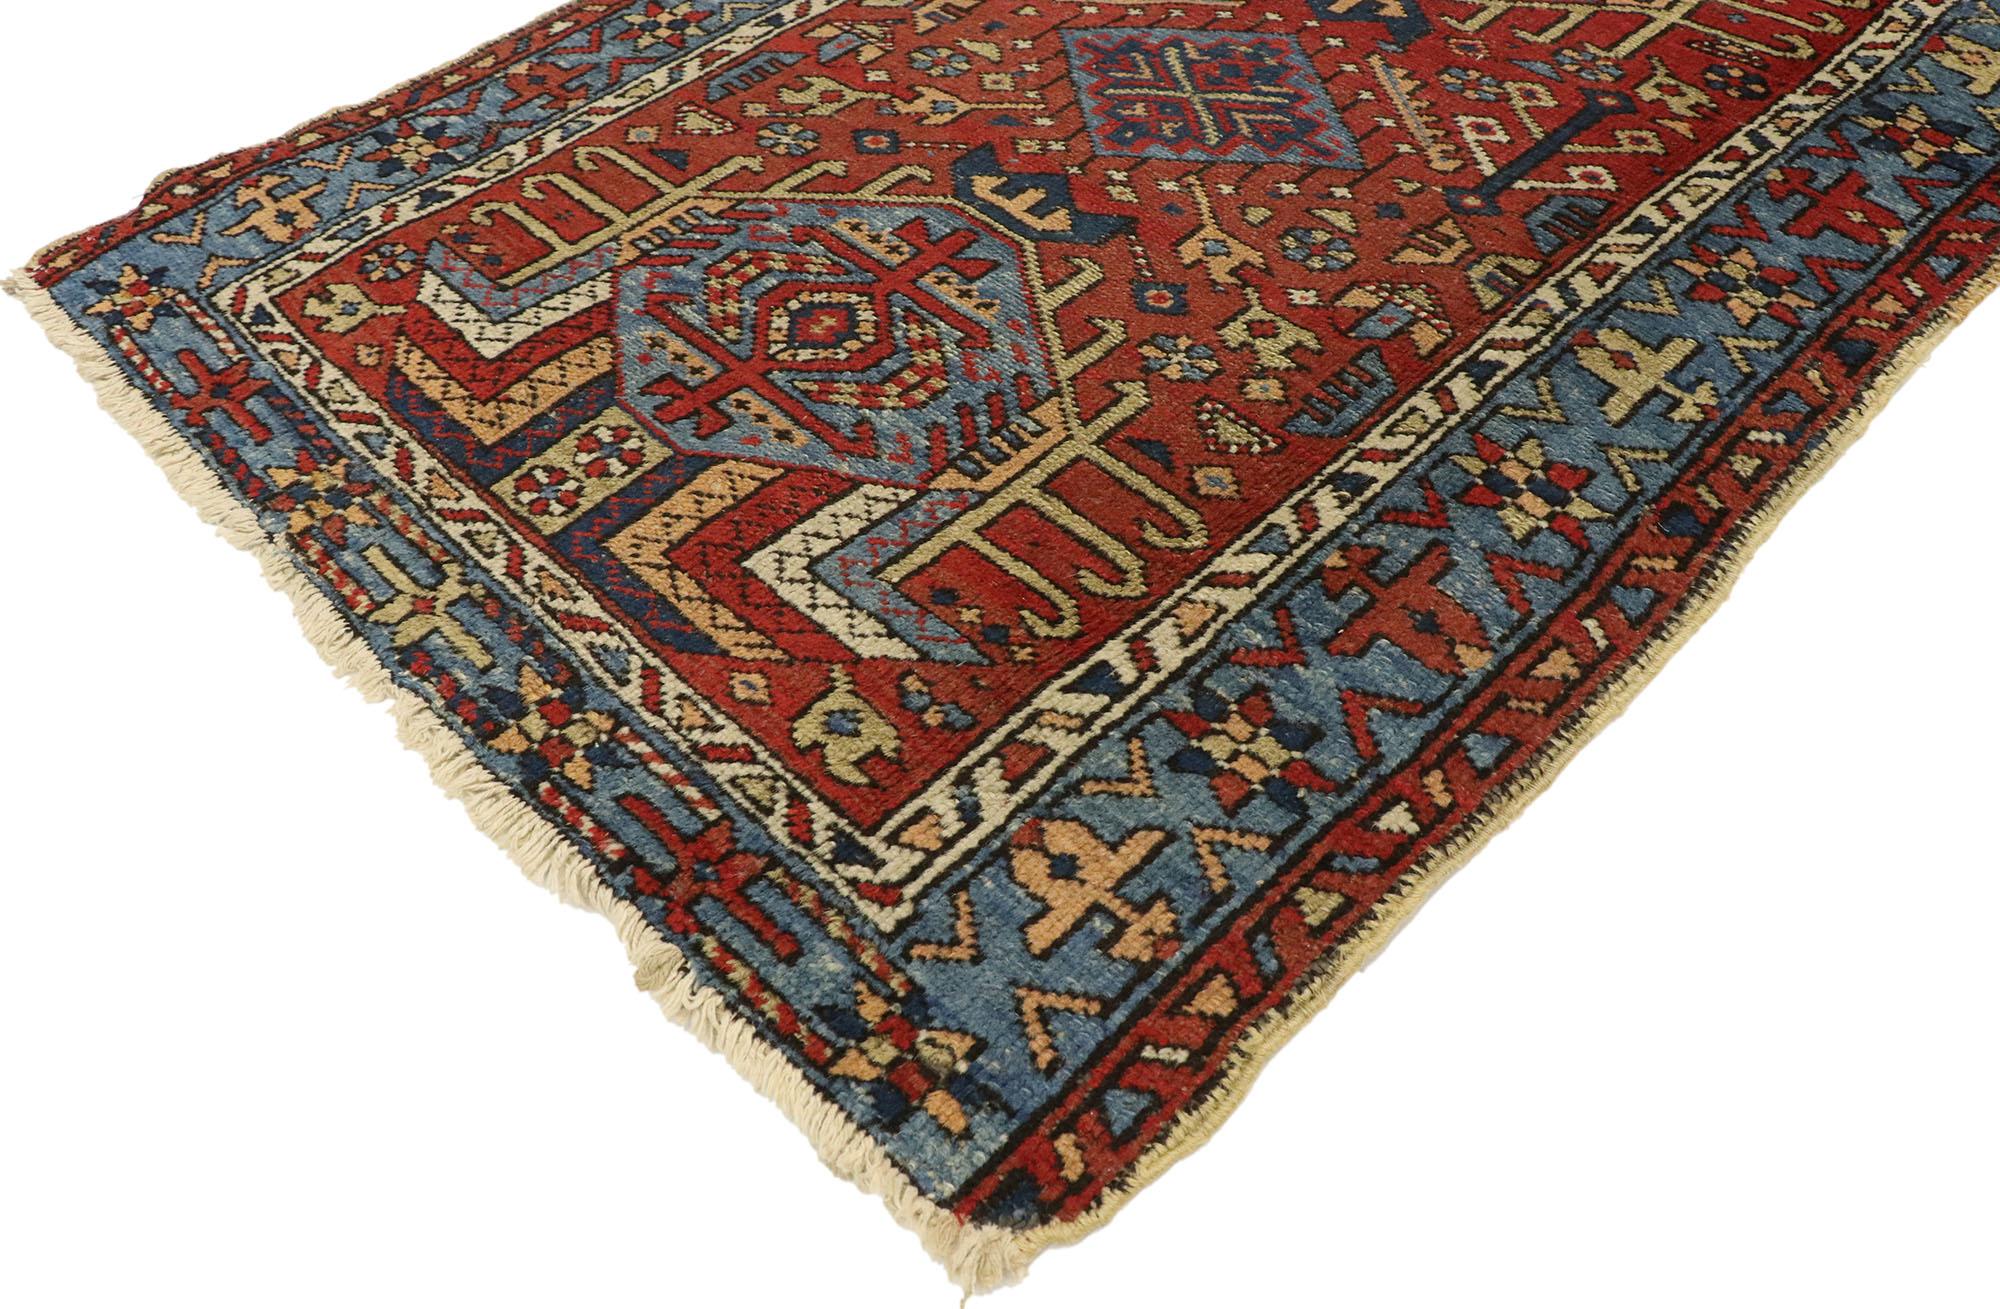 73317 Antique Persian Karaja Heriz rug with Modern Tribal style 02'10 x 03'10. This hand-knotted wool antique Persian Heriz rug features three medallions composed of a serrated central lozenge flanked by a scarab shaped medallion surrounded by an